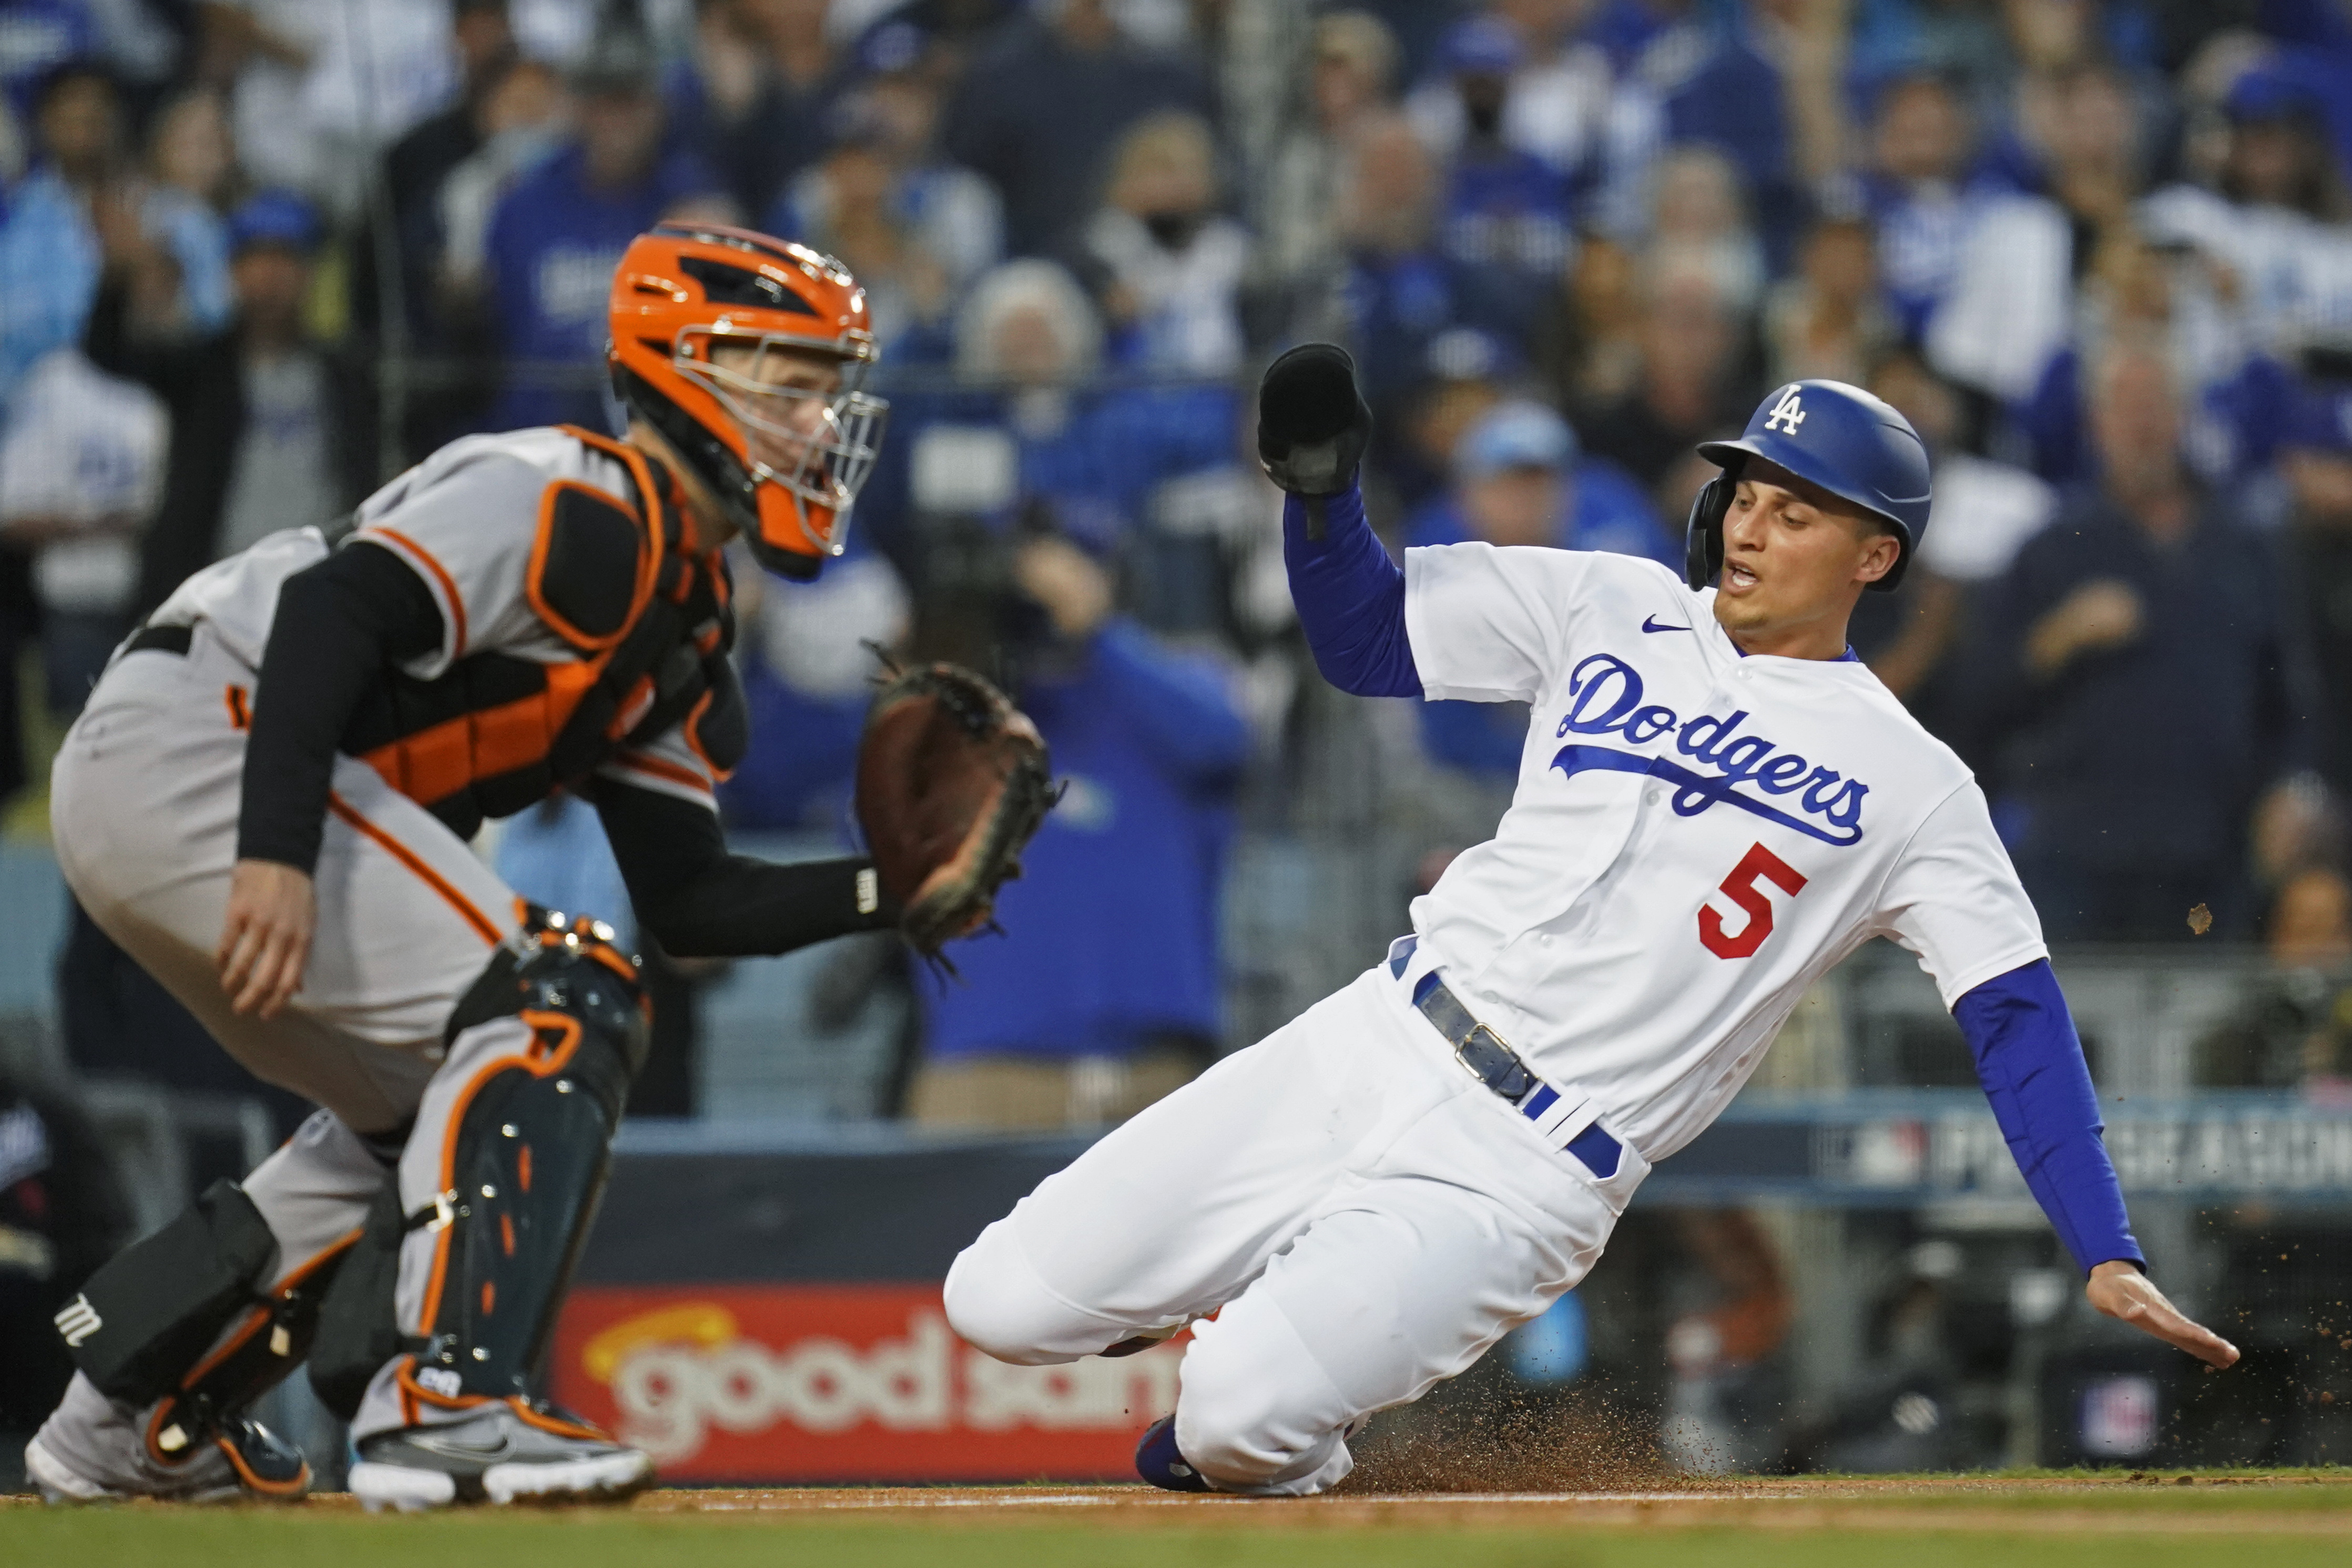 San Francisco Giants vs Los Angeles Dodgers NLDS Game 5 free live stream, score updates, odds, TV channel, how to watch MLB playoffs online (10/14/21)